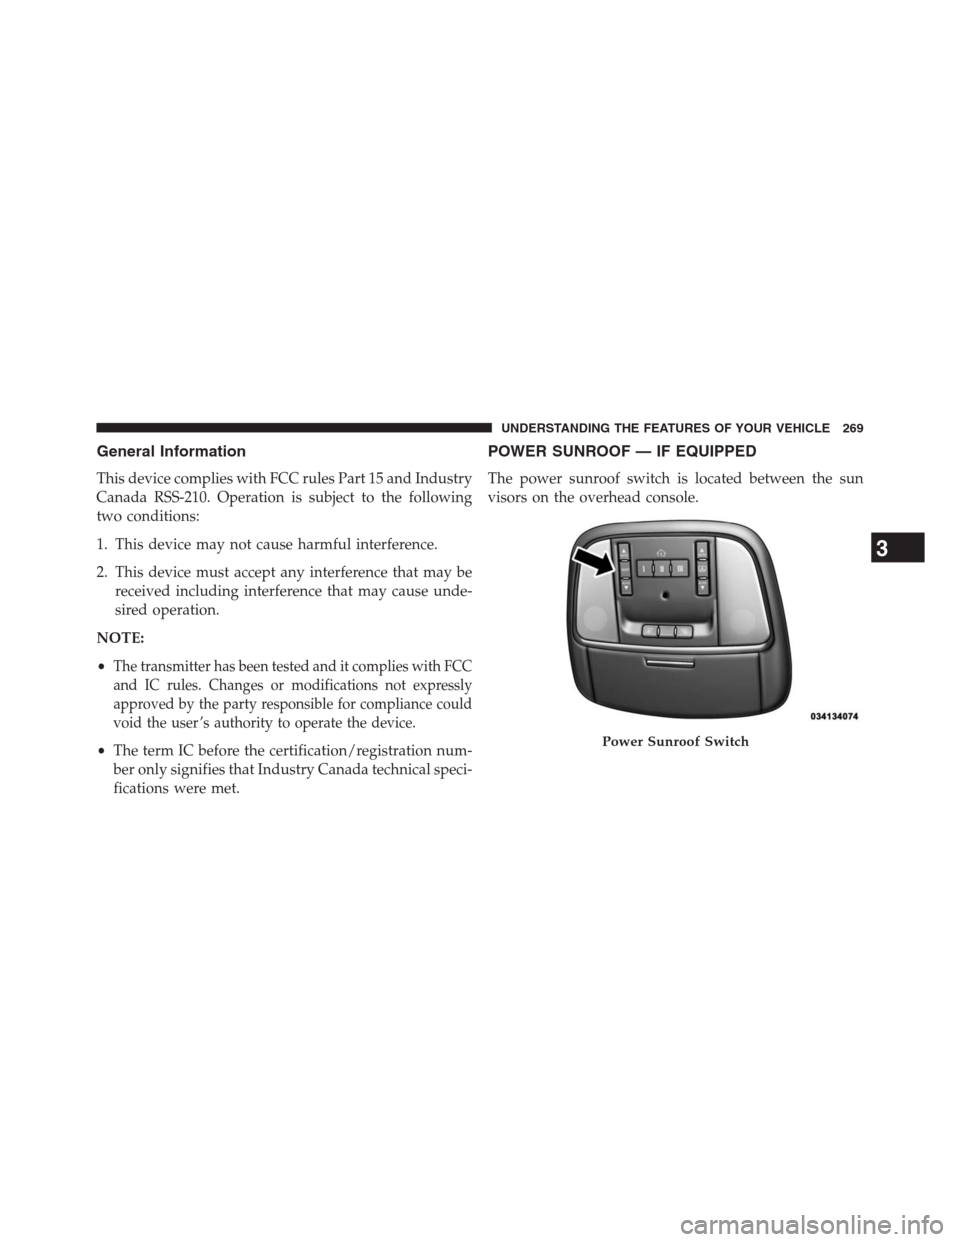 JEEP GRAND CHEROKEE 2013 WK2 / 4.G Owners Manual General Information
This device complies with FCC rules Part 15 and Industry
Canada RSS-210. Operation is subject to the following
two conditions:
1. This device may not cause harmful interference.
2.